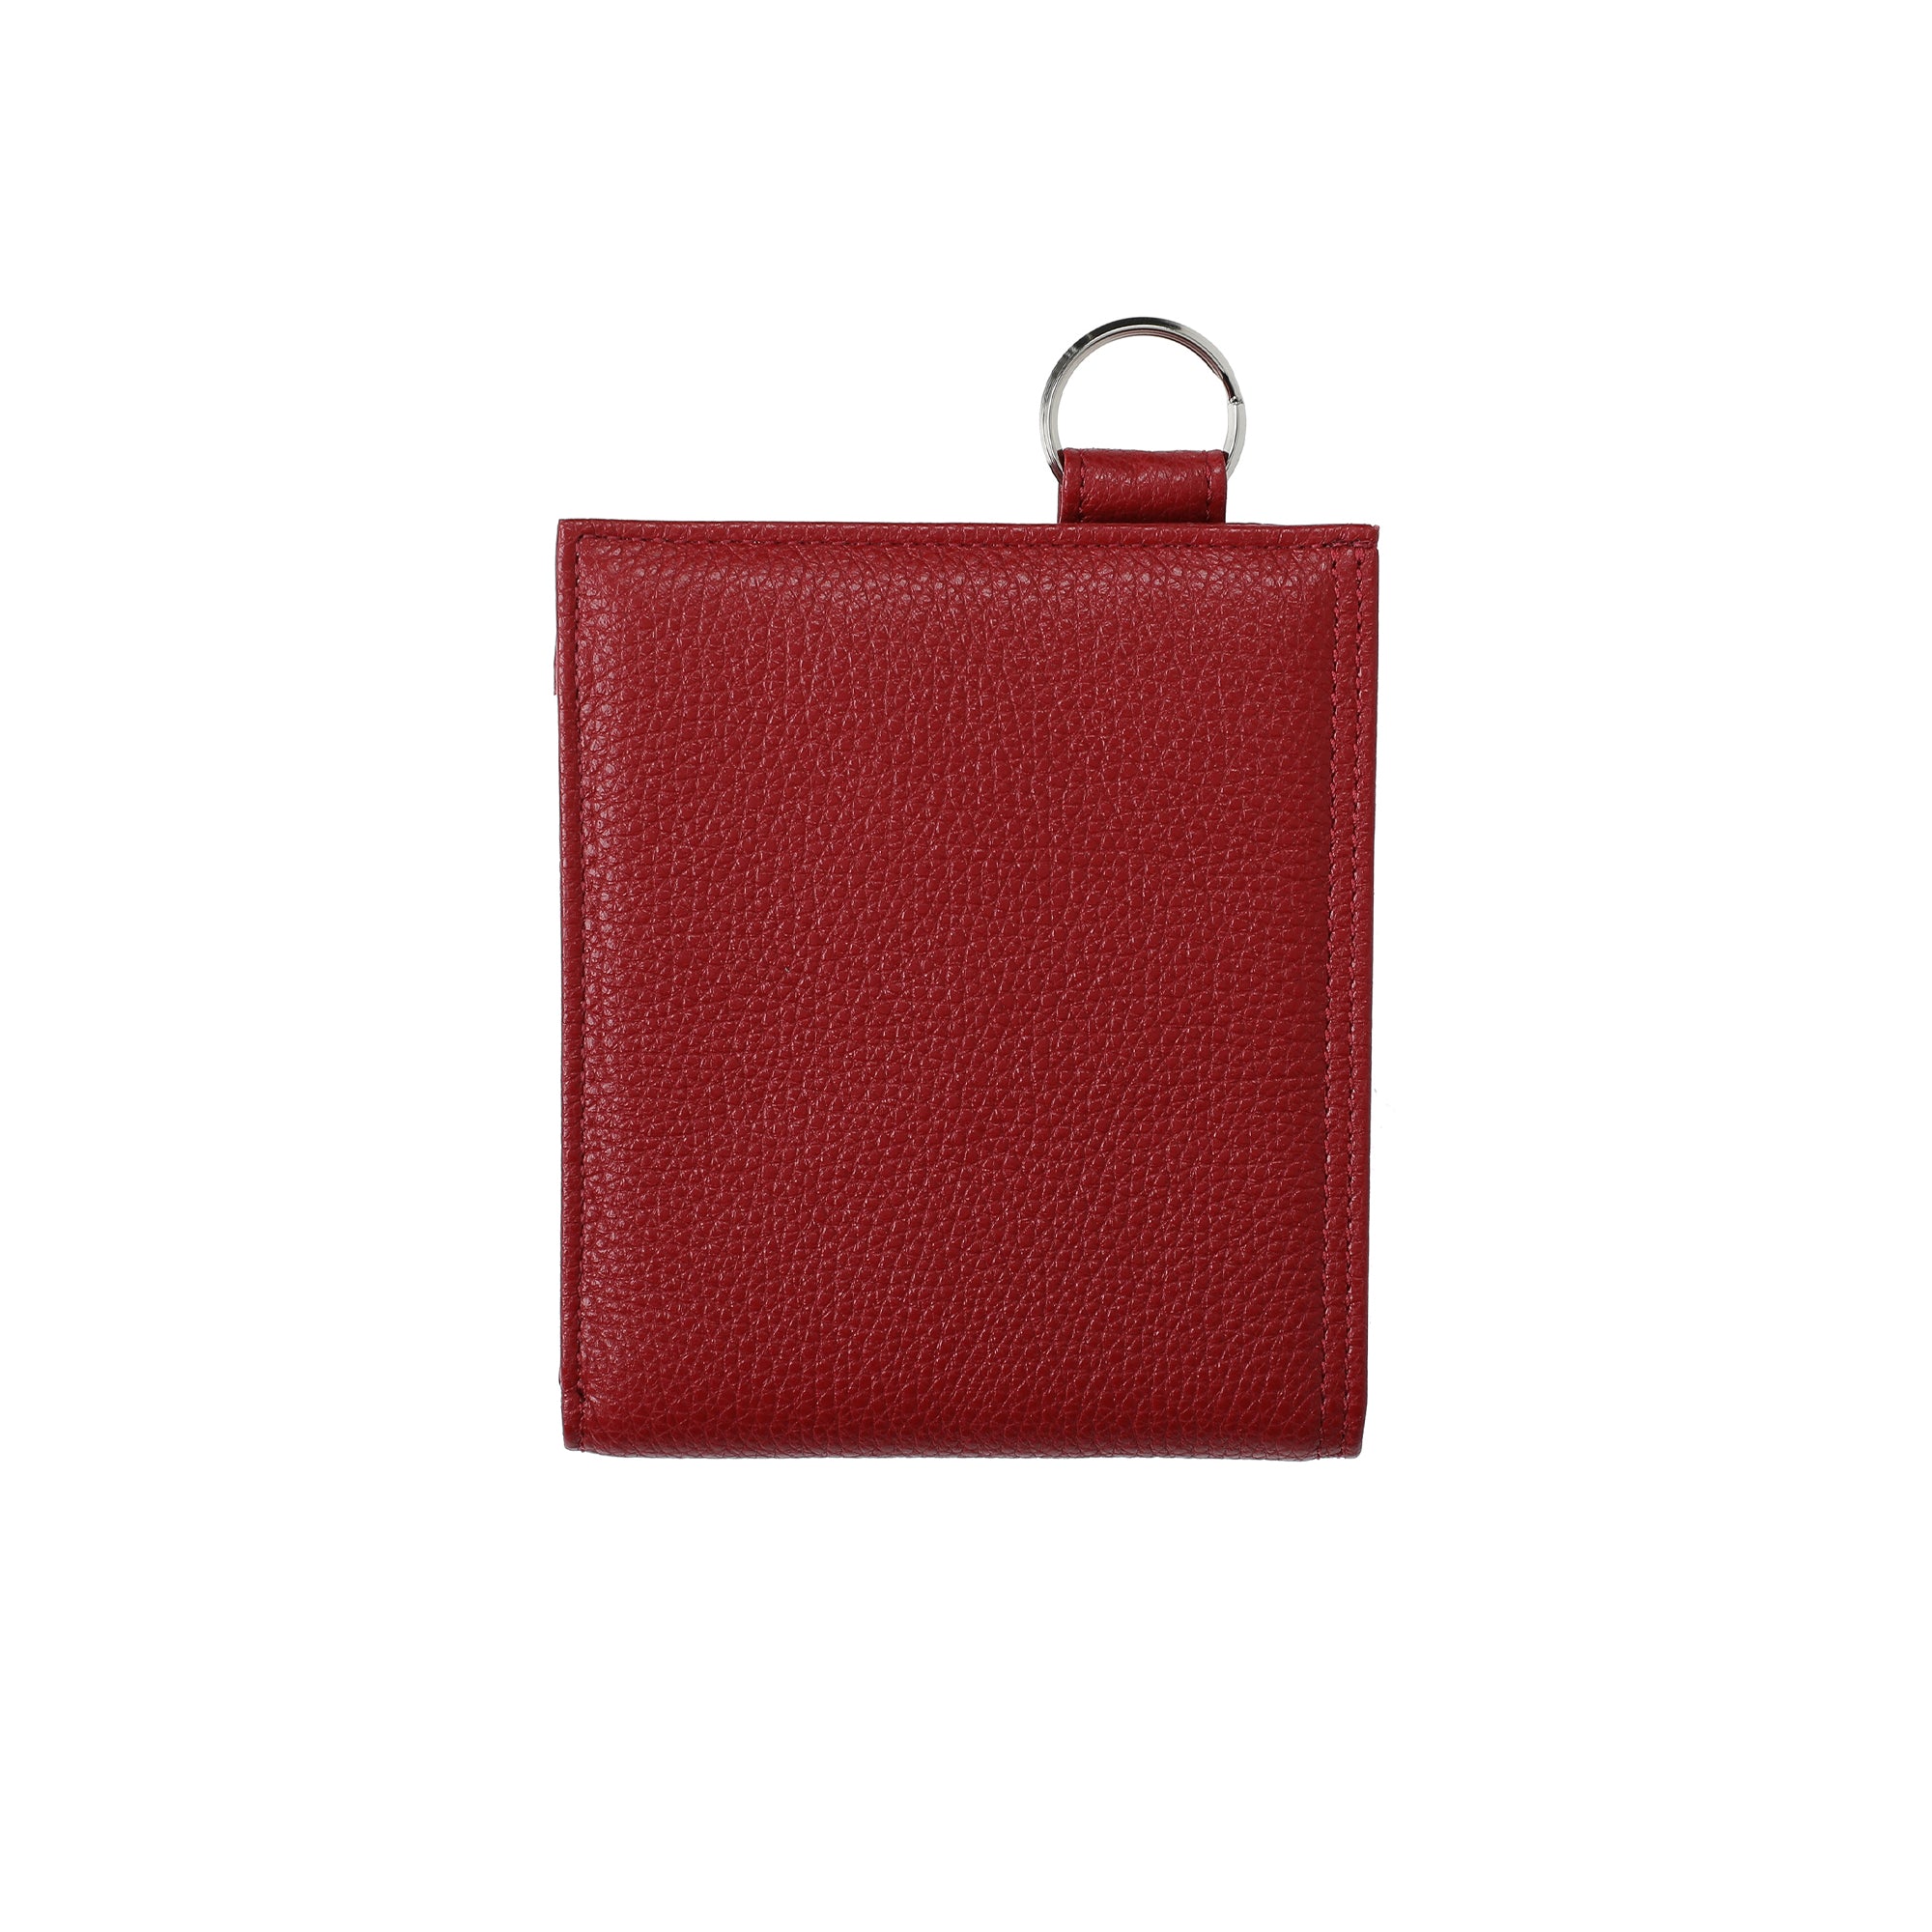 PORTER - Shrink Square Purse - (Red) view 2